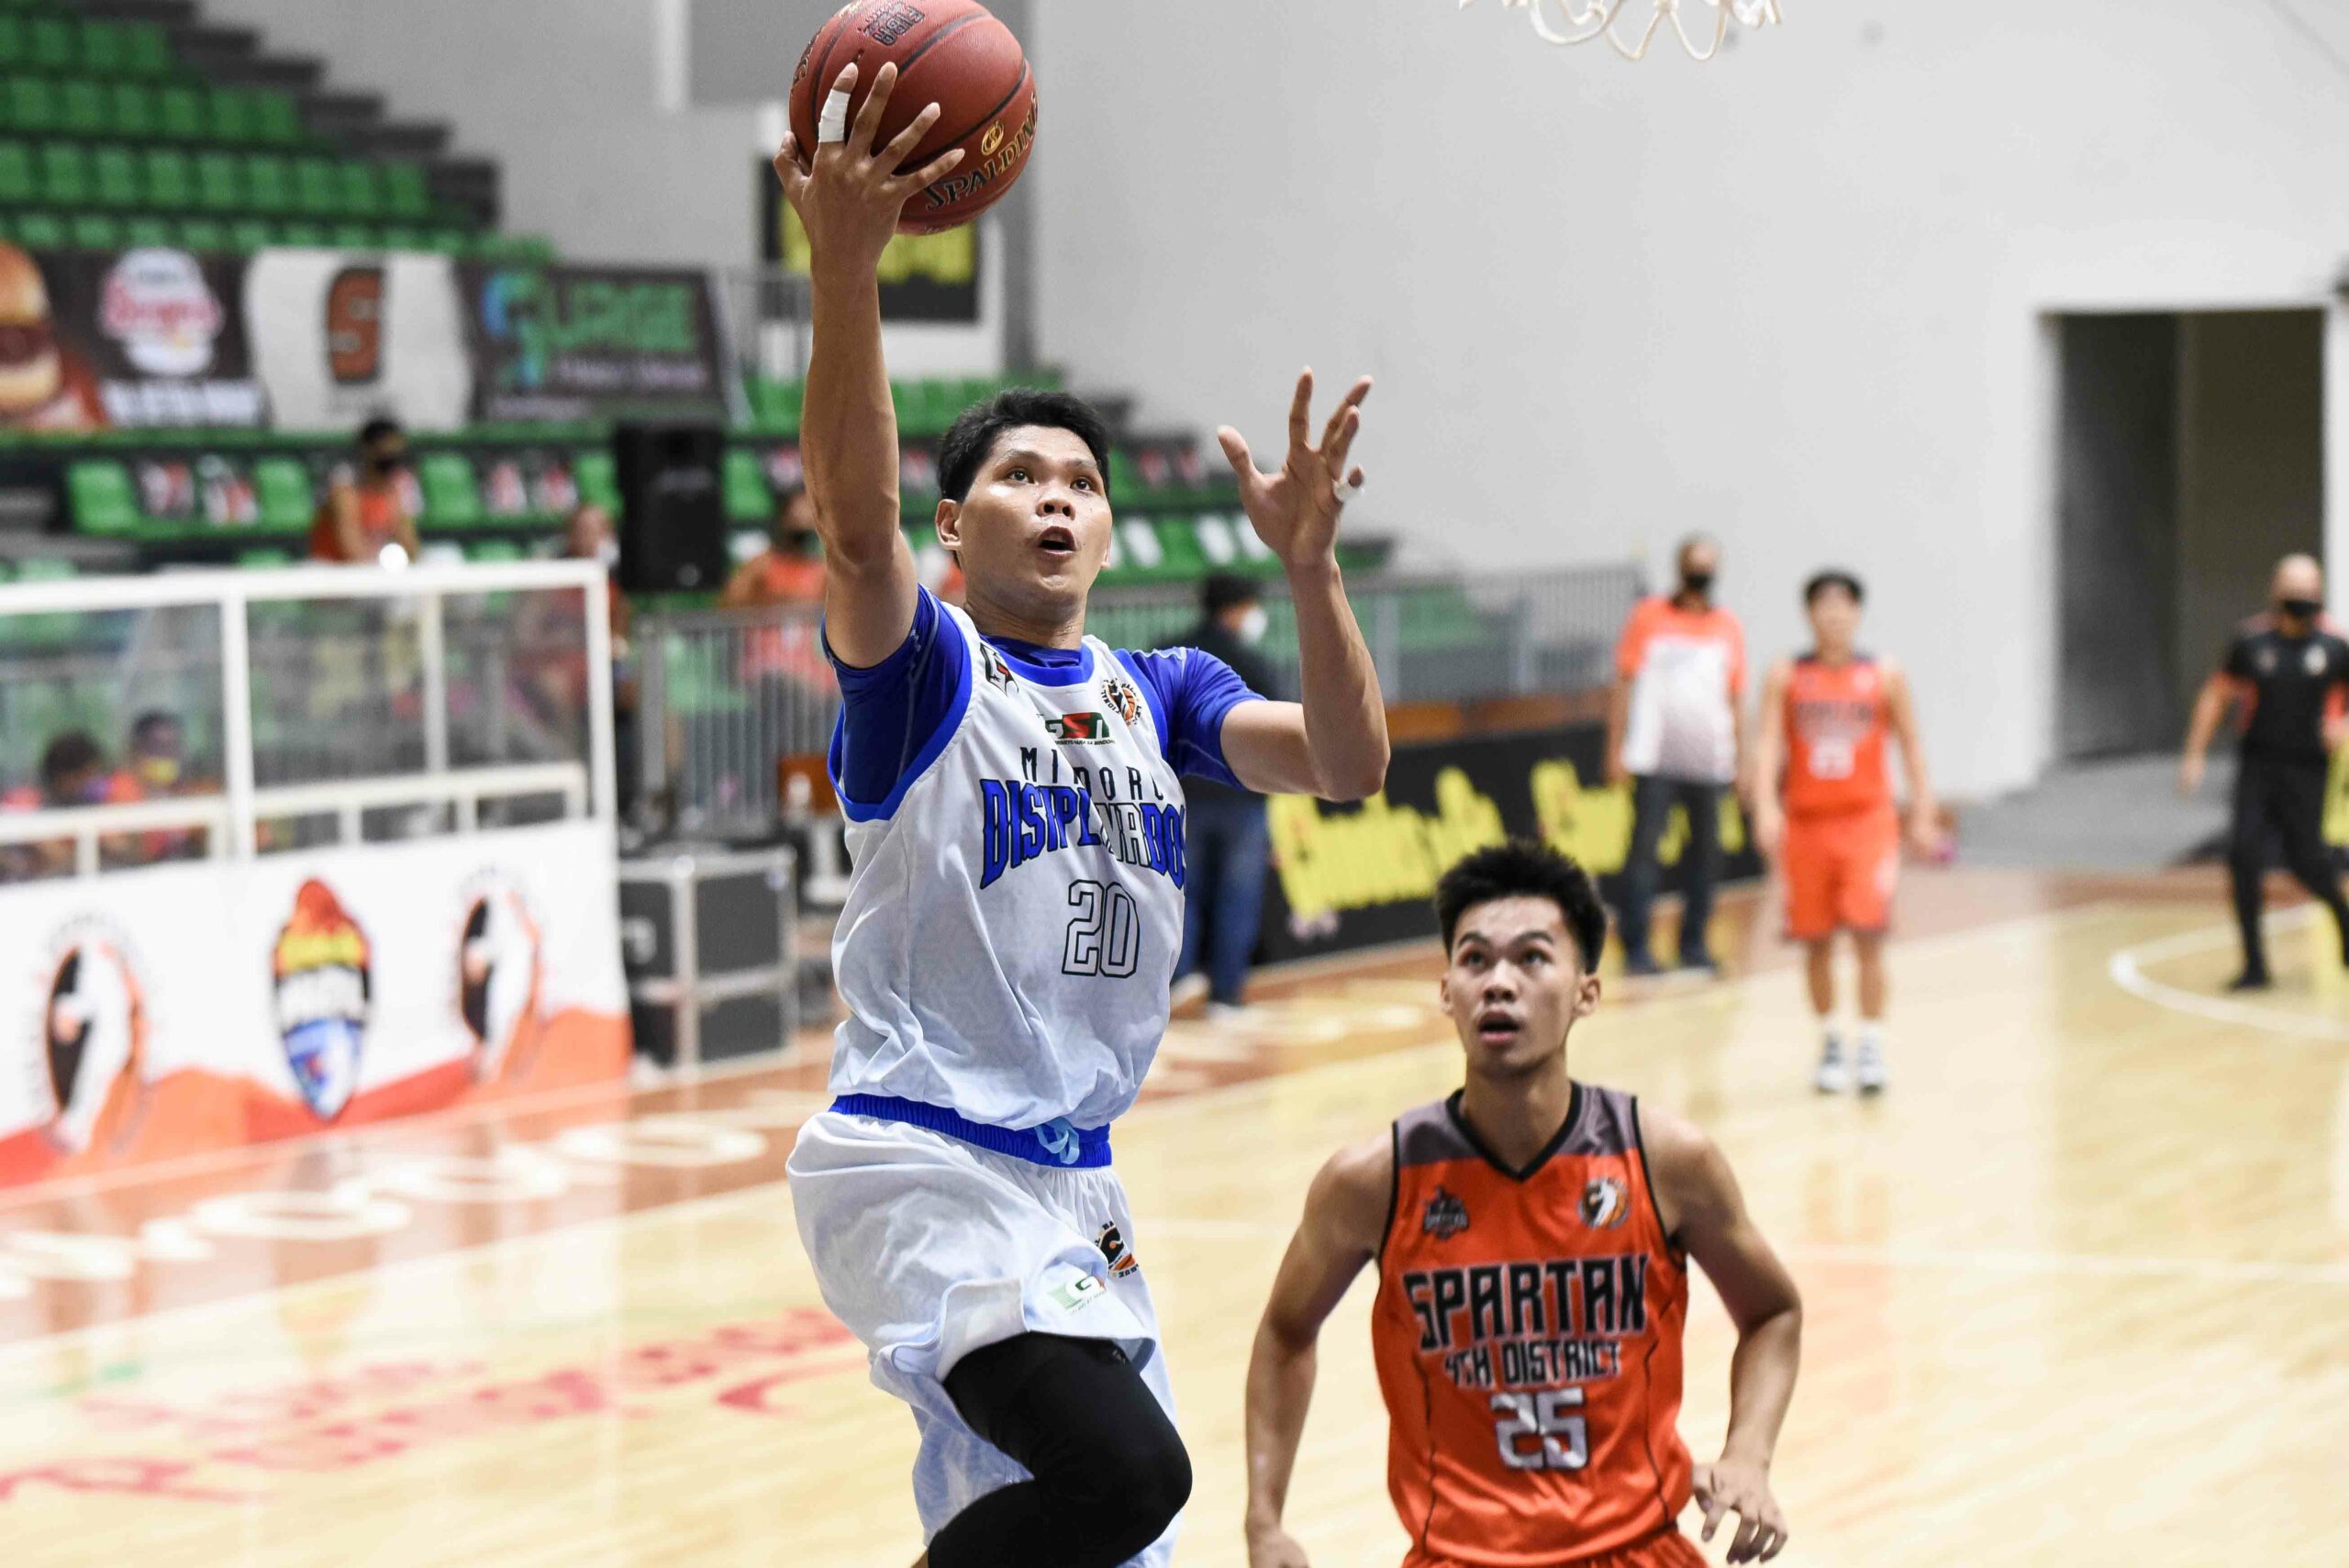 2021-Chooks-NBL-Mindoro-vs-Stan-D4-Rodel-Vaygan-Mindoro-scaled Falcon a lucky charm as Mindoro ousts Stan D4 in NBL Basketball NBL News  - philippine sports news